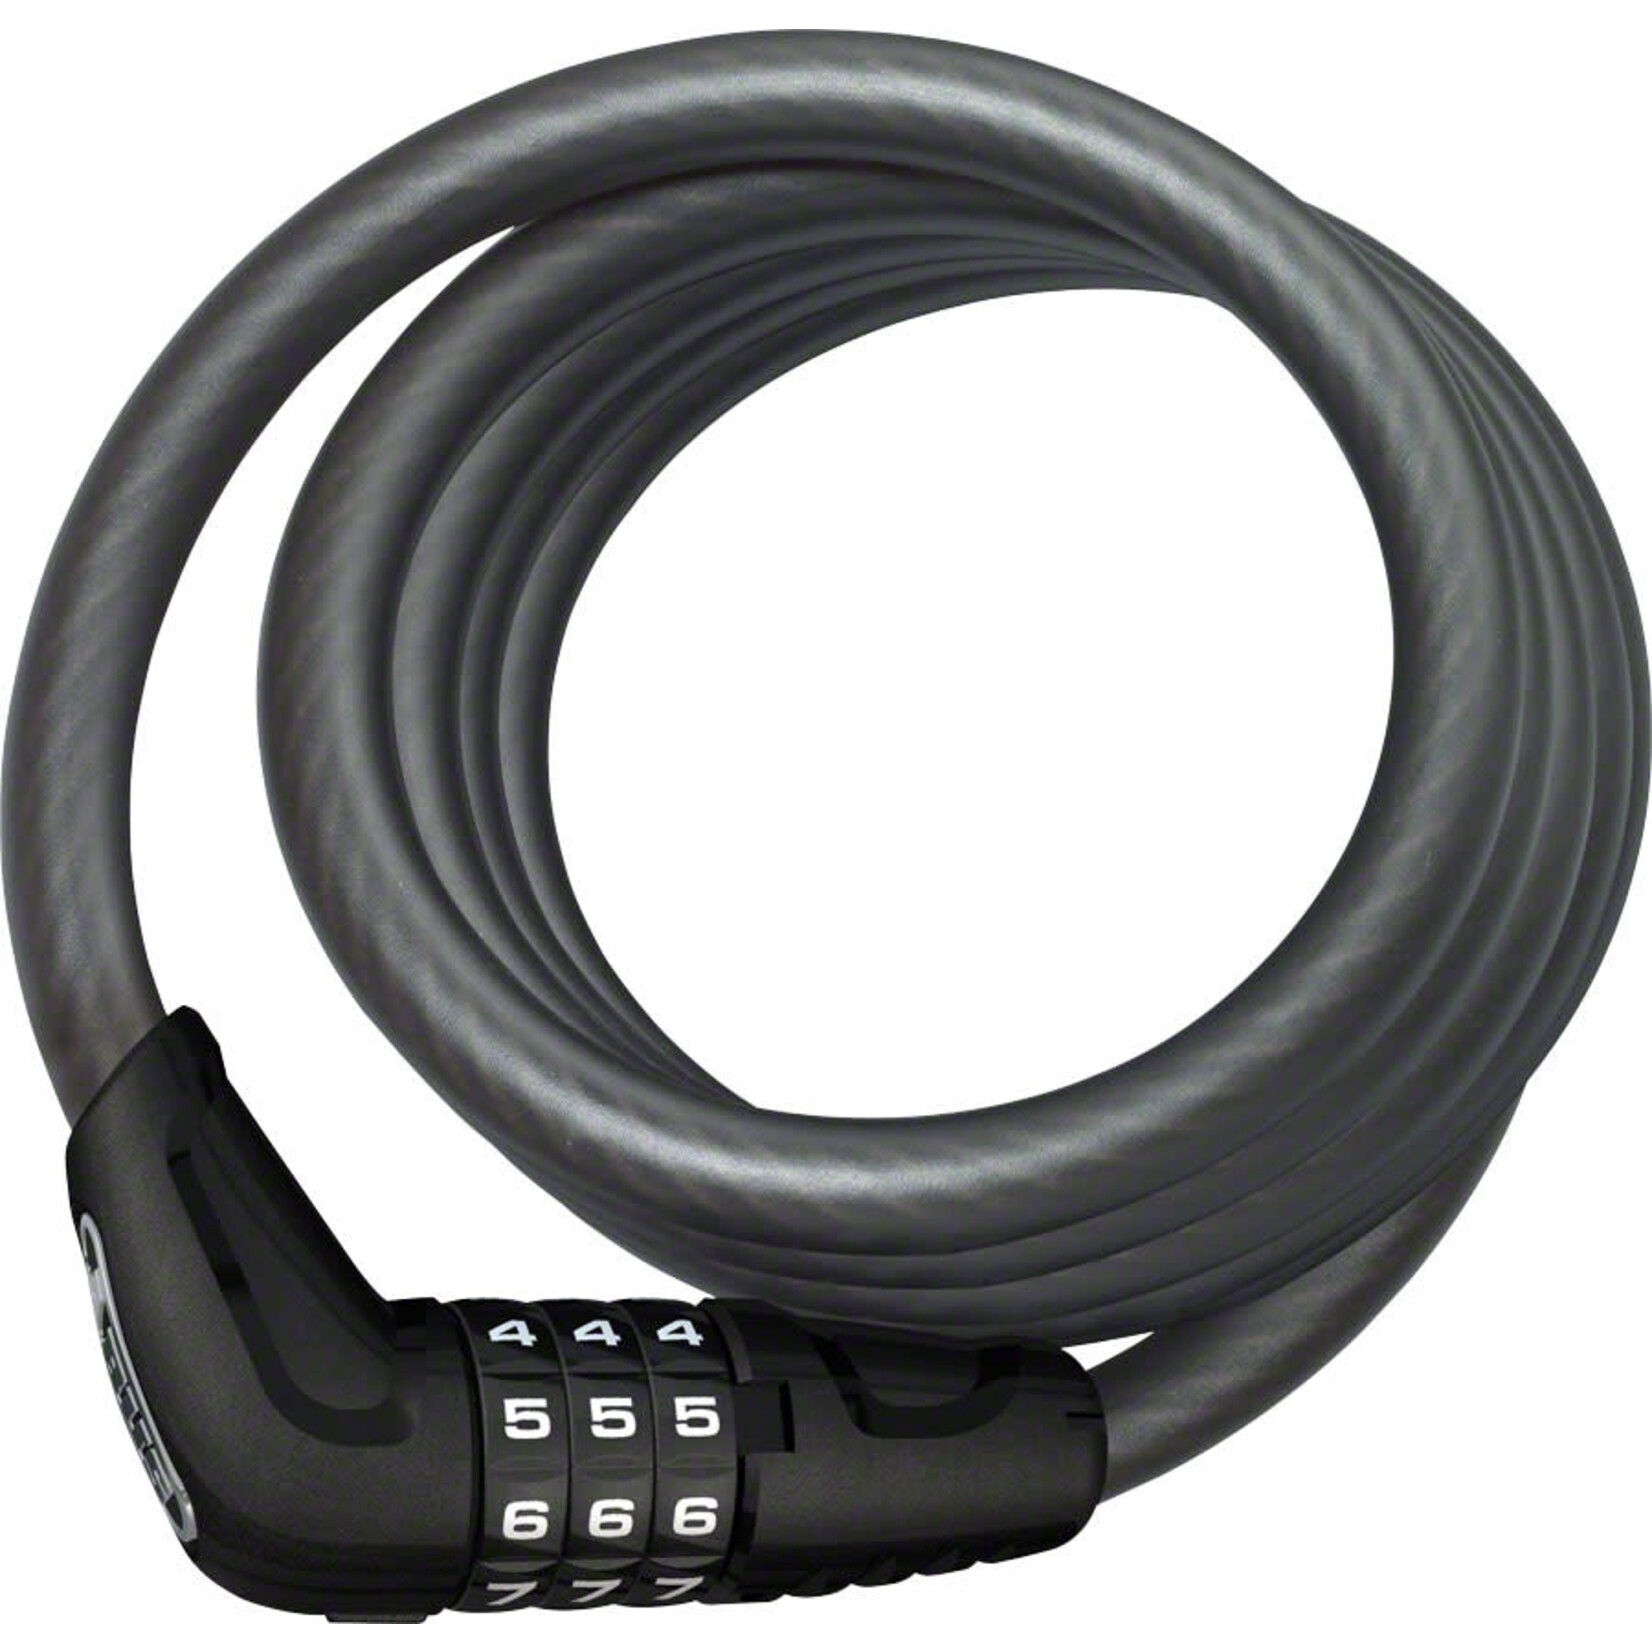 Abus ABUS Star 4508 Combination Coiled Cable Lock: 150cm x 8mm, Black